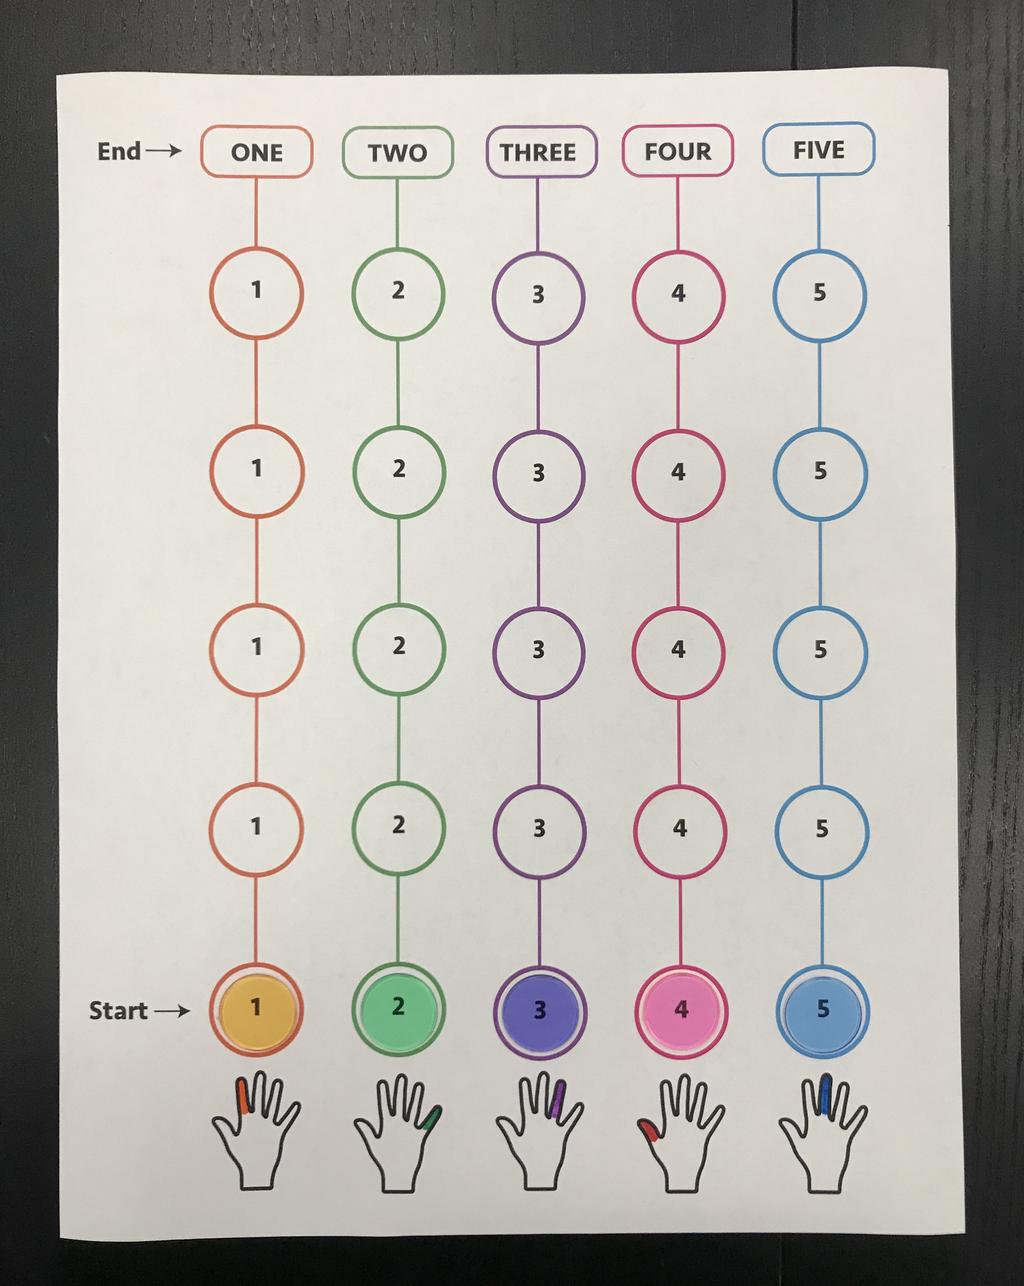 Game Rules Game Rules:. Assign numbers - to the fingers on one of your hands in whatever order you want. Color in the finger you will use for each number underneath its corresponding trail.